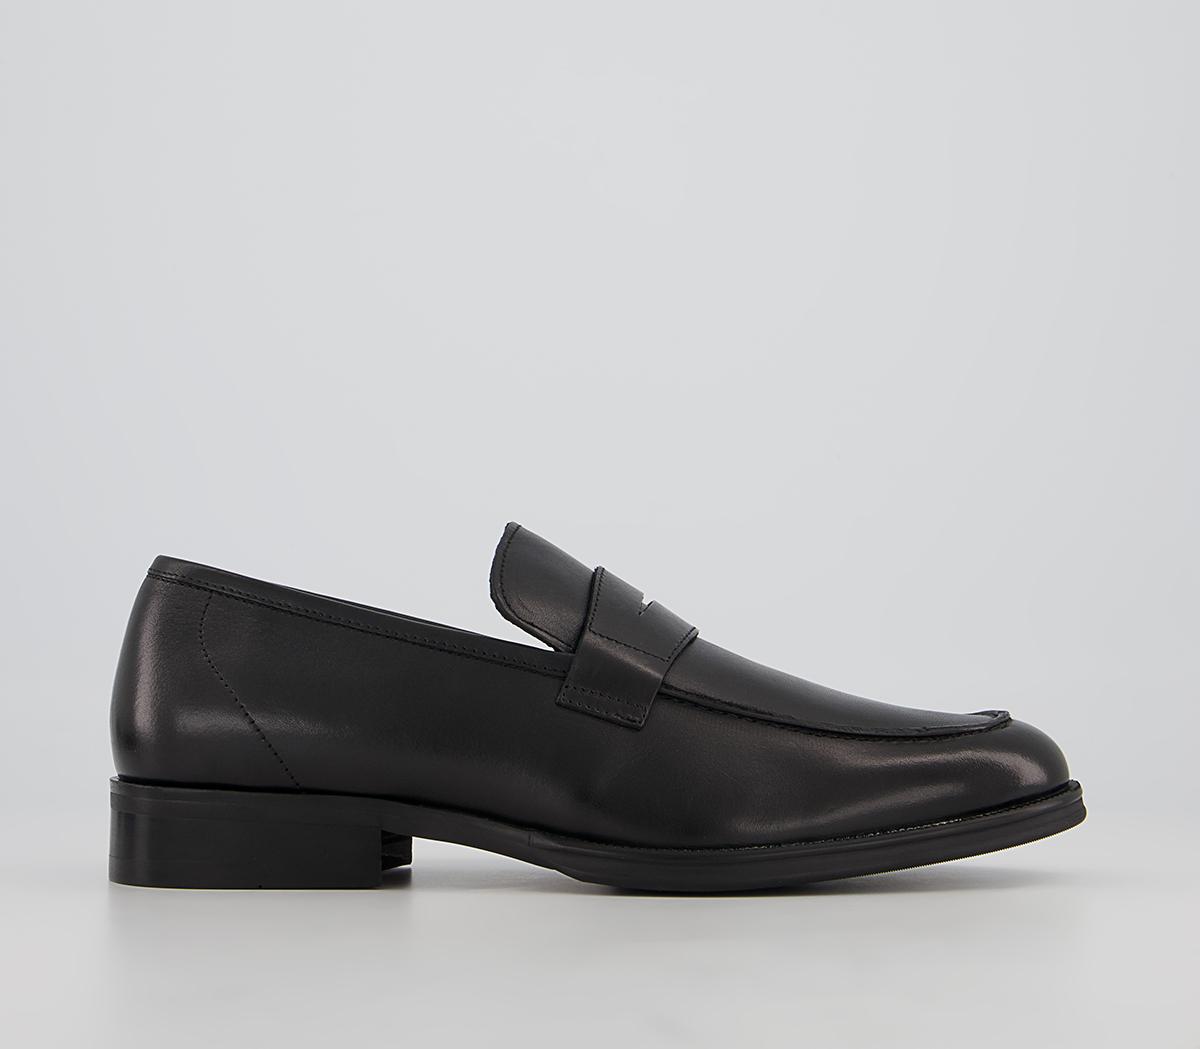 OfficeMilan Classic Saddle LoafersBlack Leather